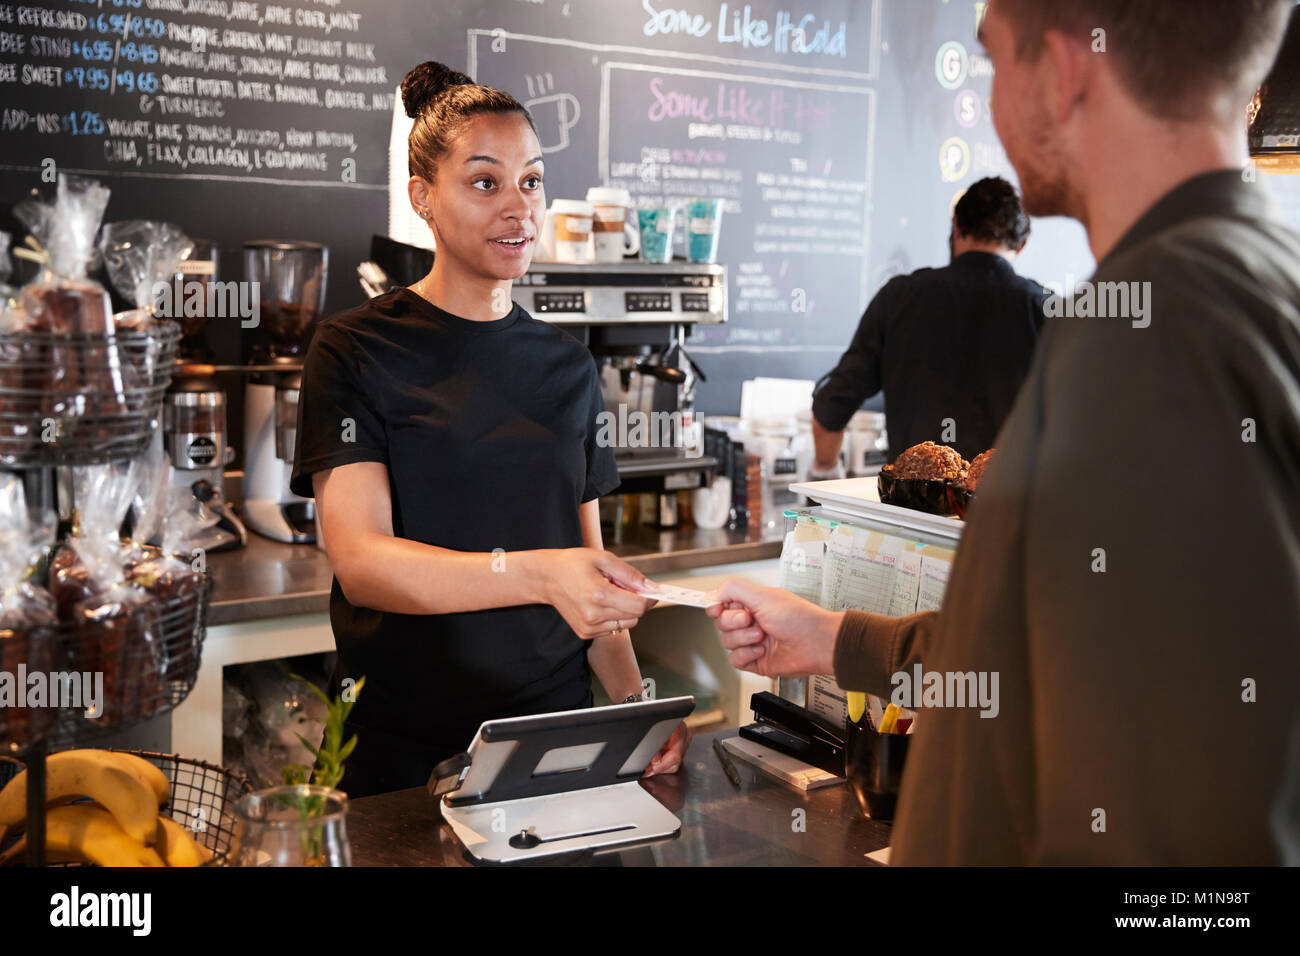 Customer Paying In Coffee Shop Using Credit Card Stock Photo